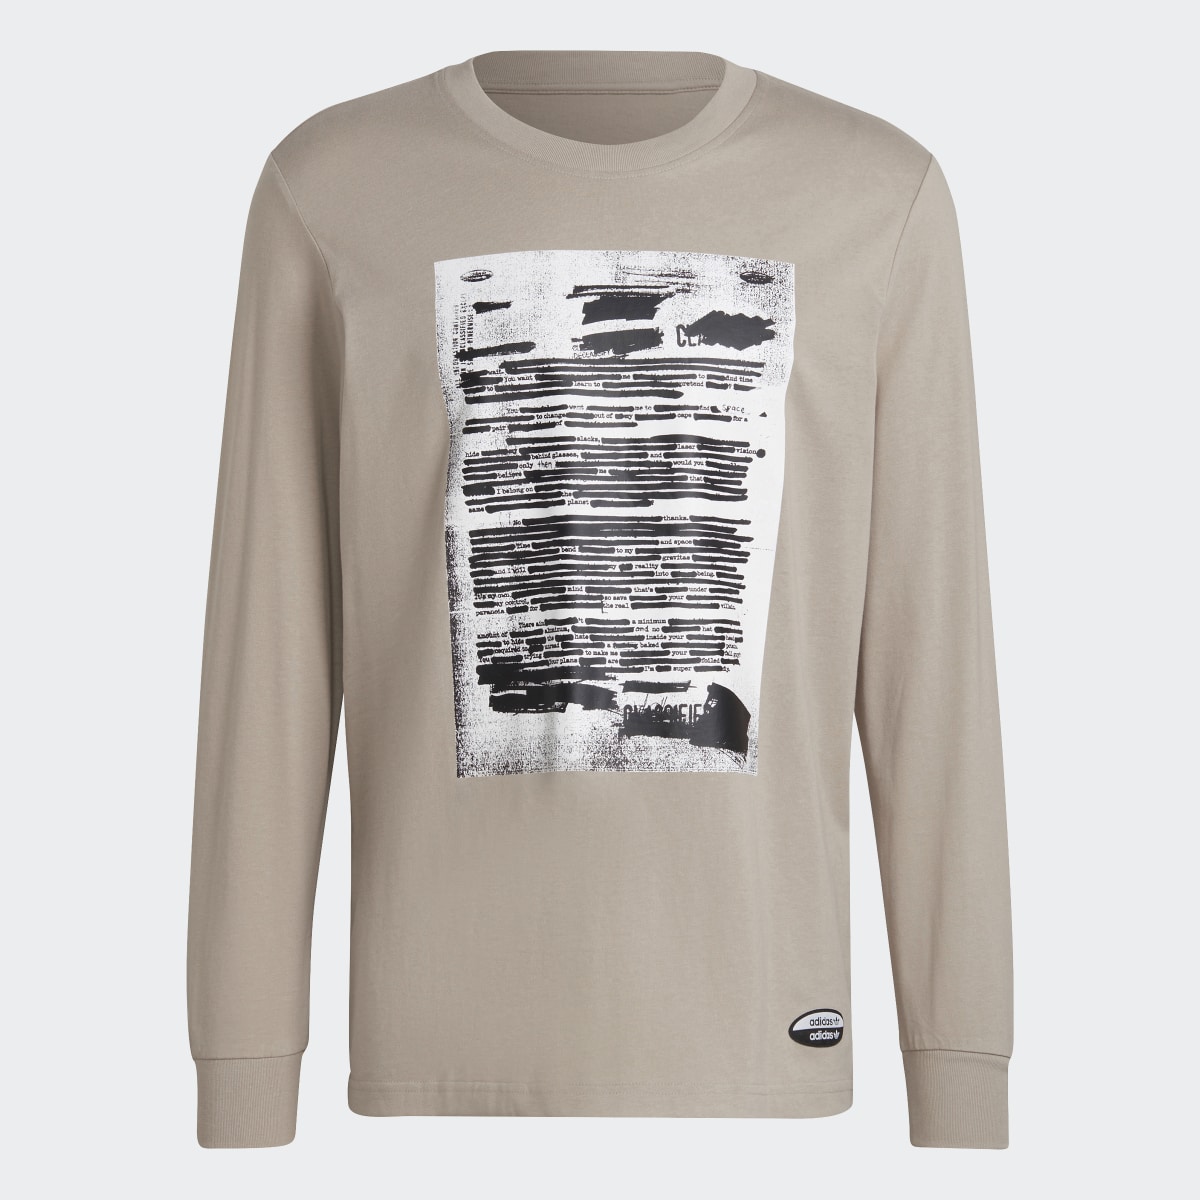 Adidas R.Y.V. Graphic Long-Sleeve Top. 5